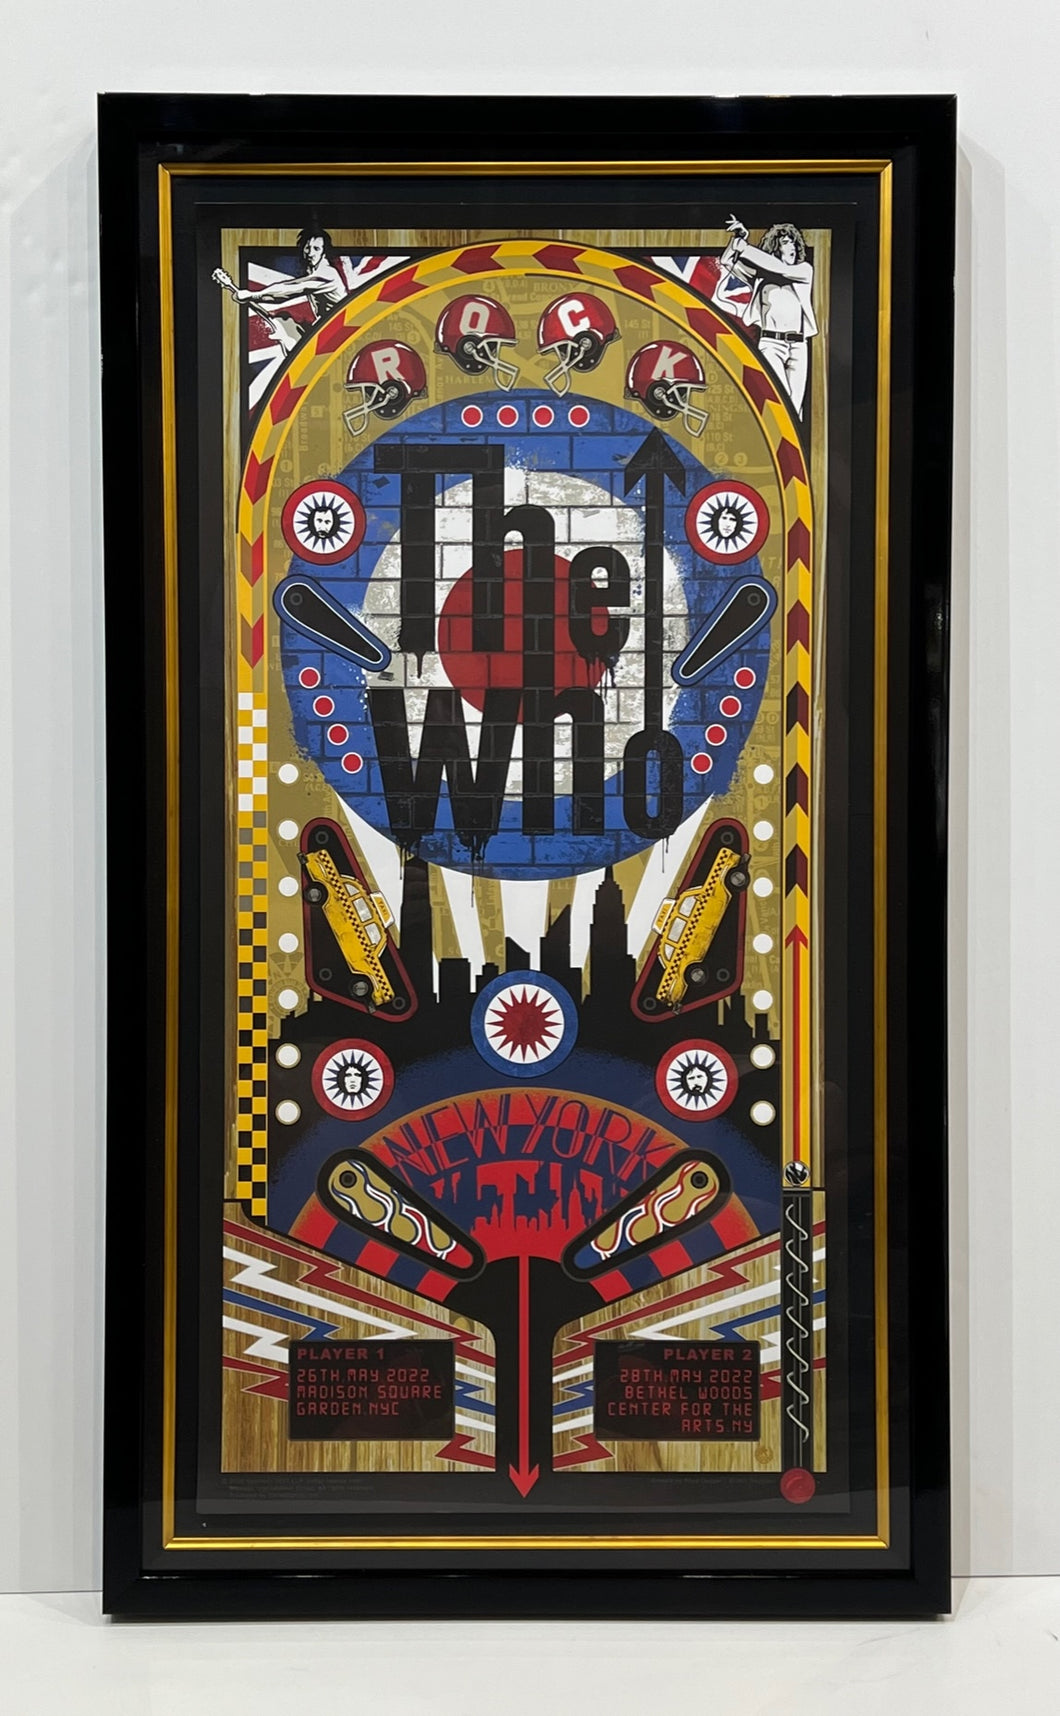 THE WHO IN NEW YORK - PINBALL POSTER (2022)